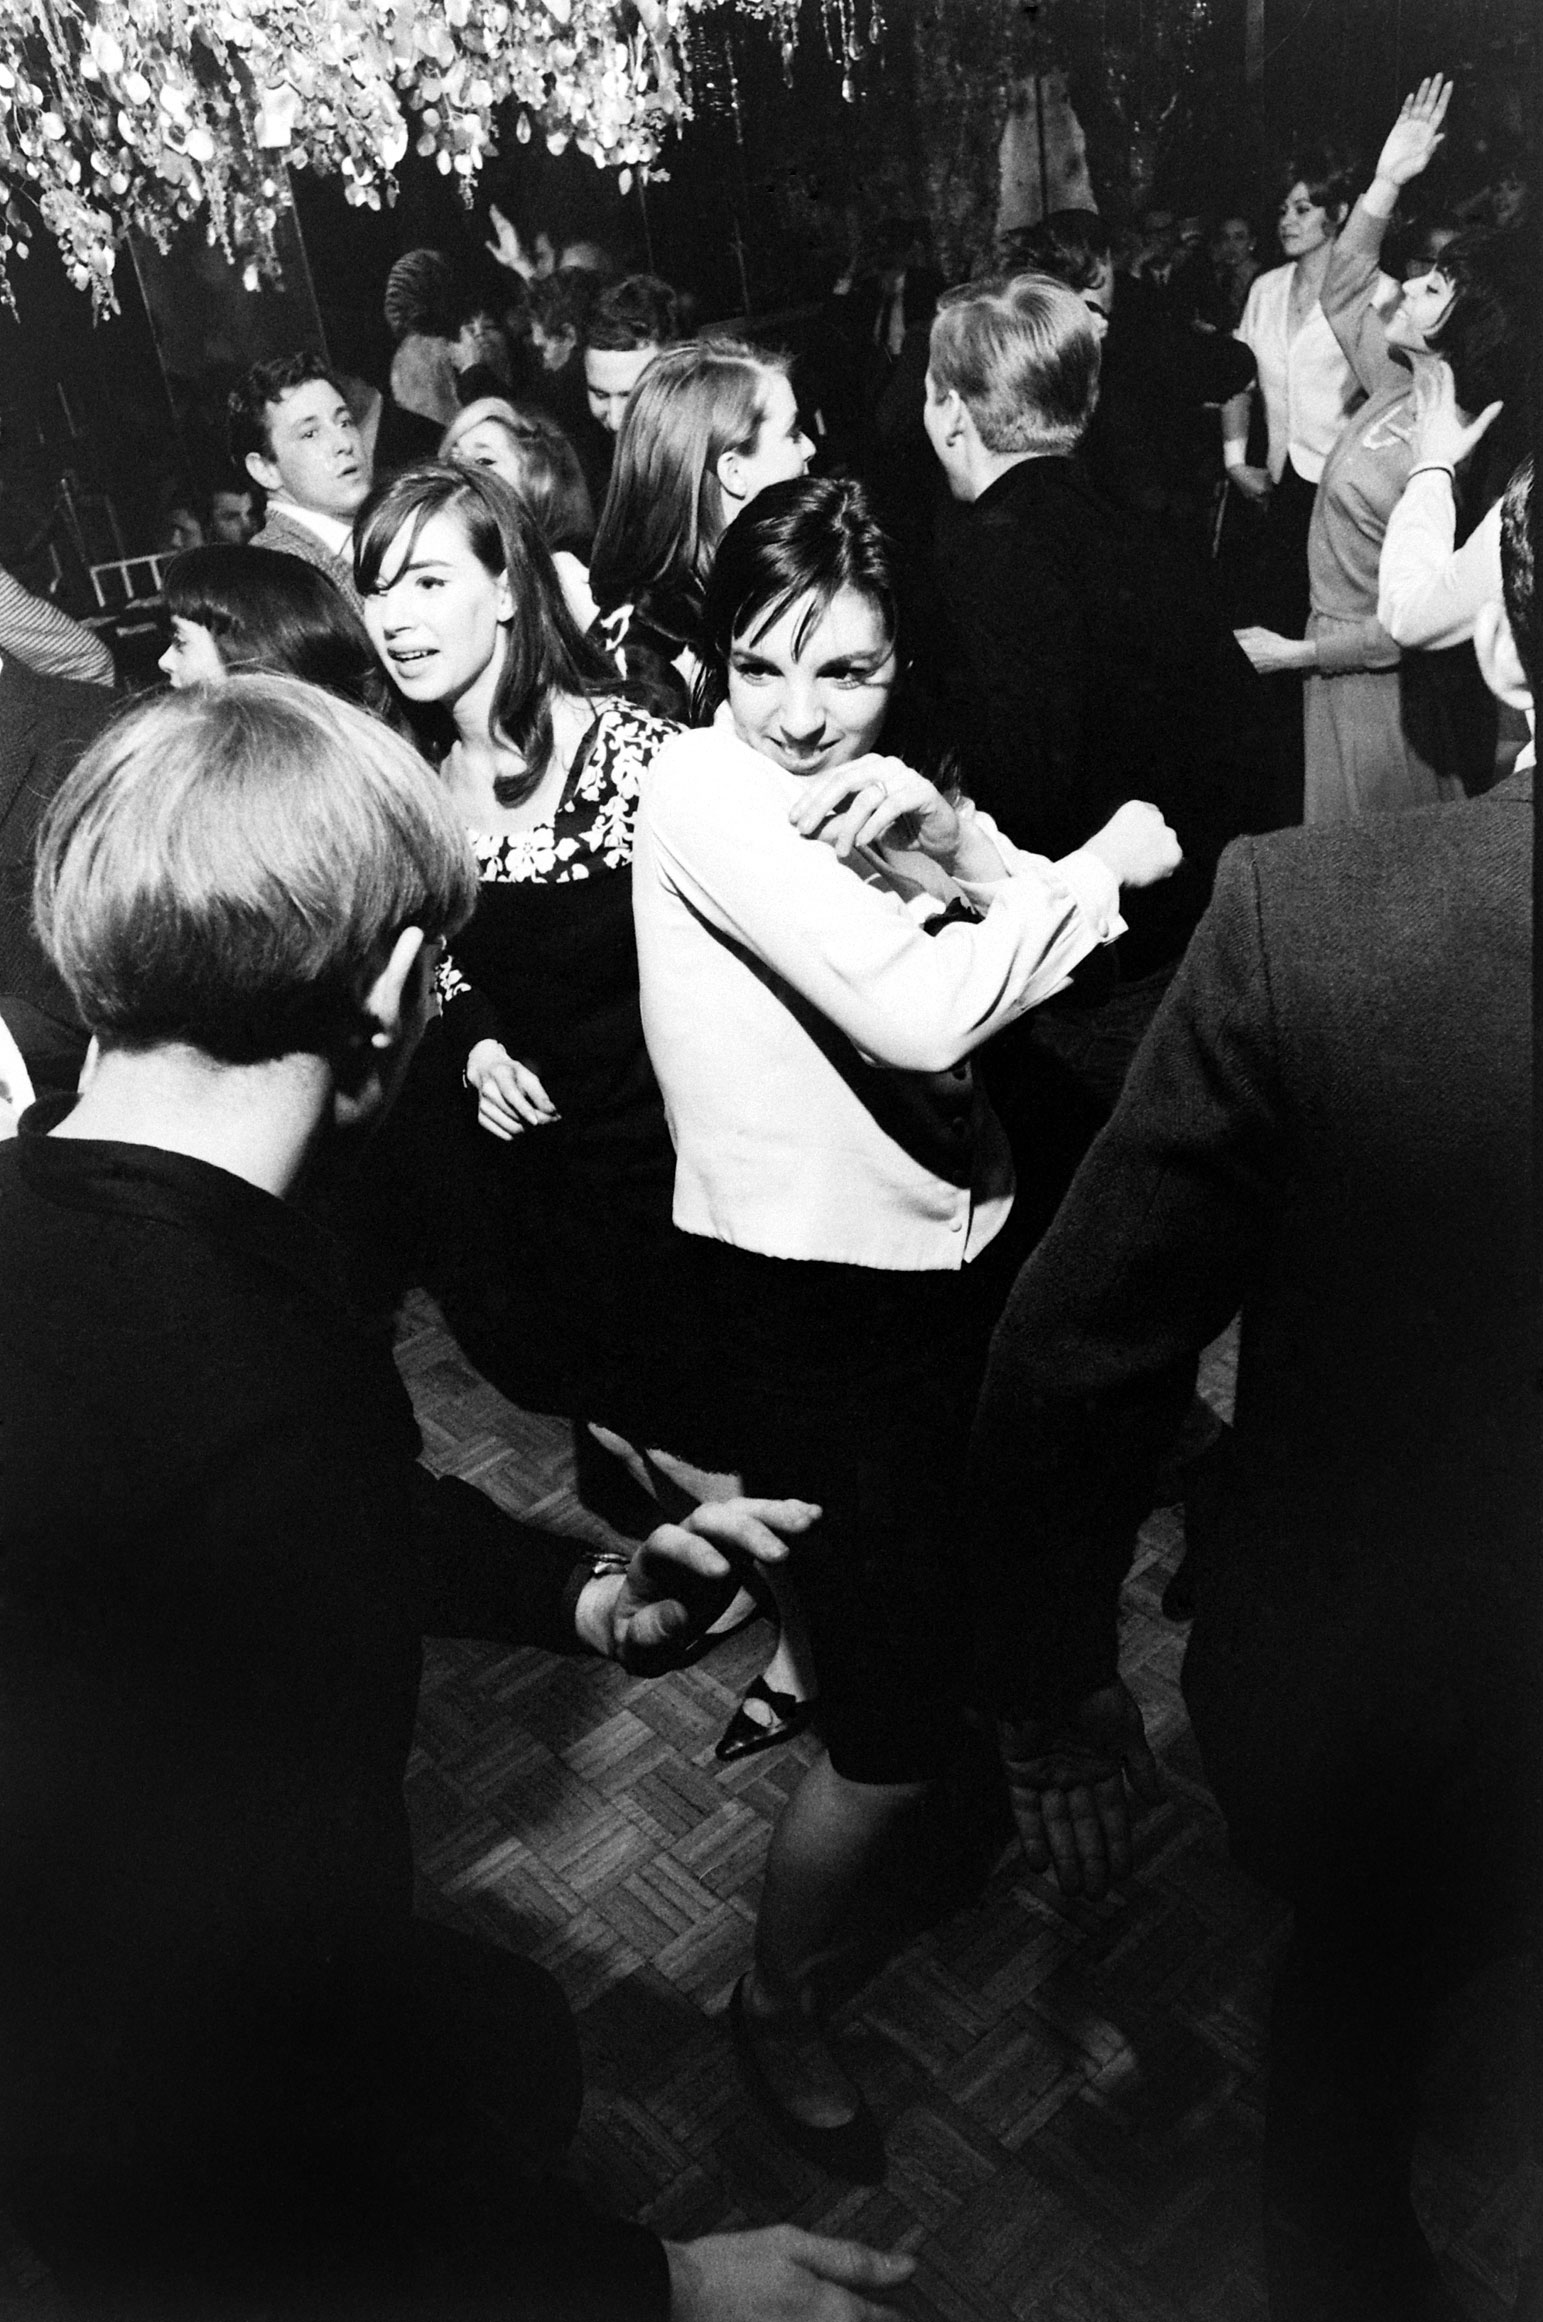 Liza Minnelli burns up the floor at her 19th birthday party at Il Mio, a disco inside Delmonico's Hotel in New York, March 1965.